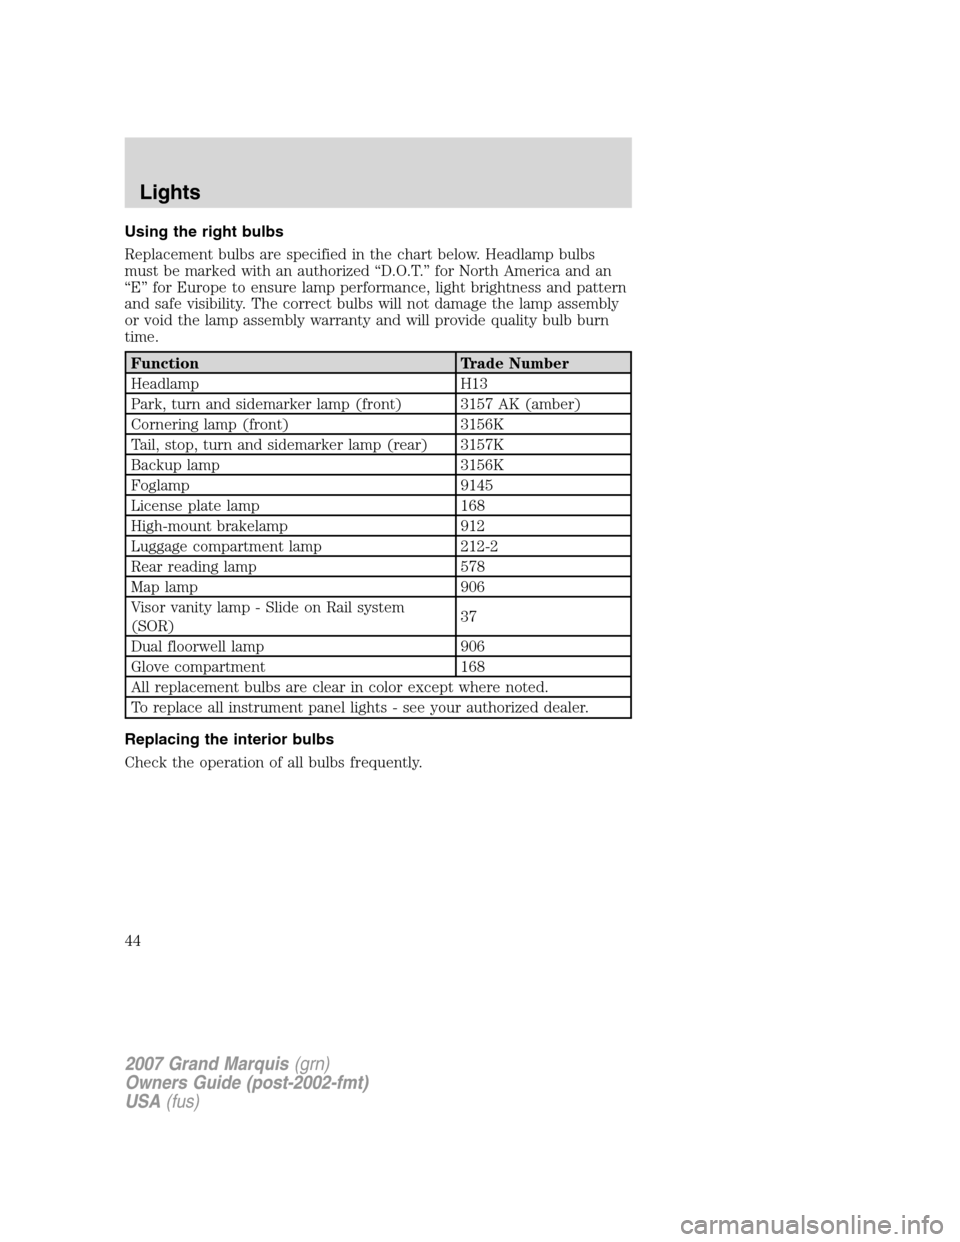 Mercury Grand Marquis 2007  Owners Manuals Using the right bulbs
Replacement bulbs are specified in the chart below. Headlamp bulbs
must be marked with an authorized “D.O.T.” for North America and an
“E” for Europe to ensure lamp perfo